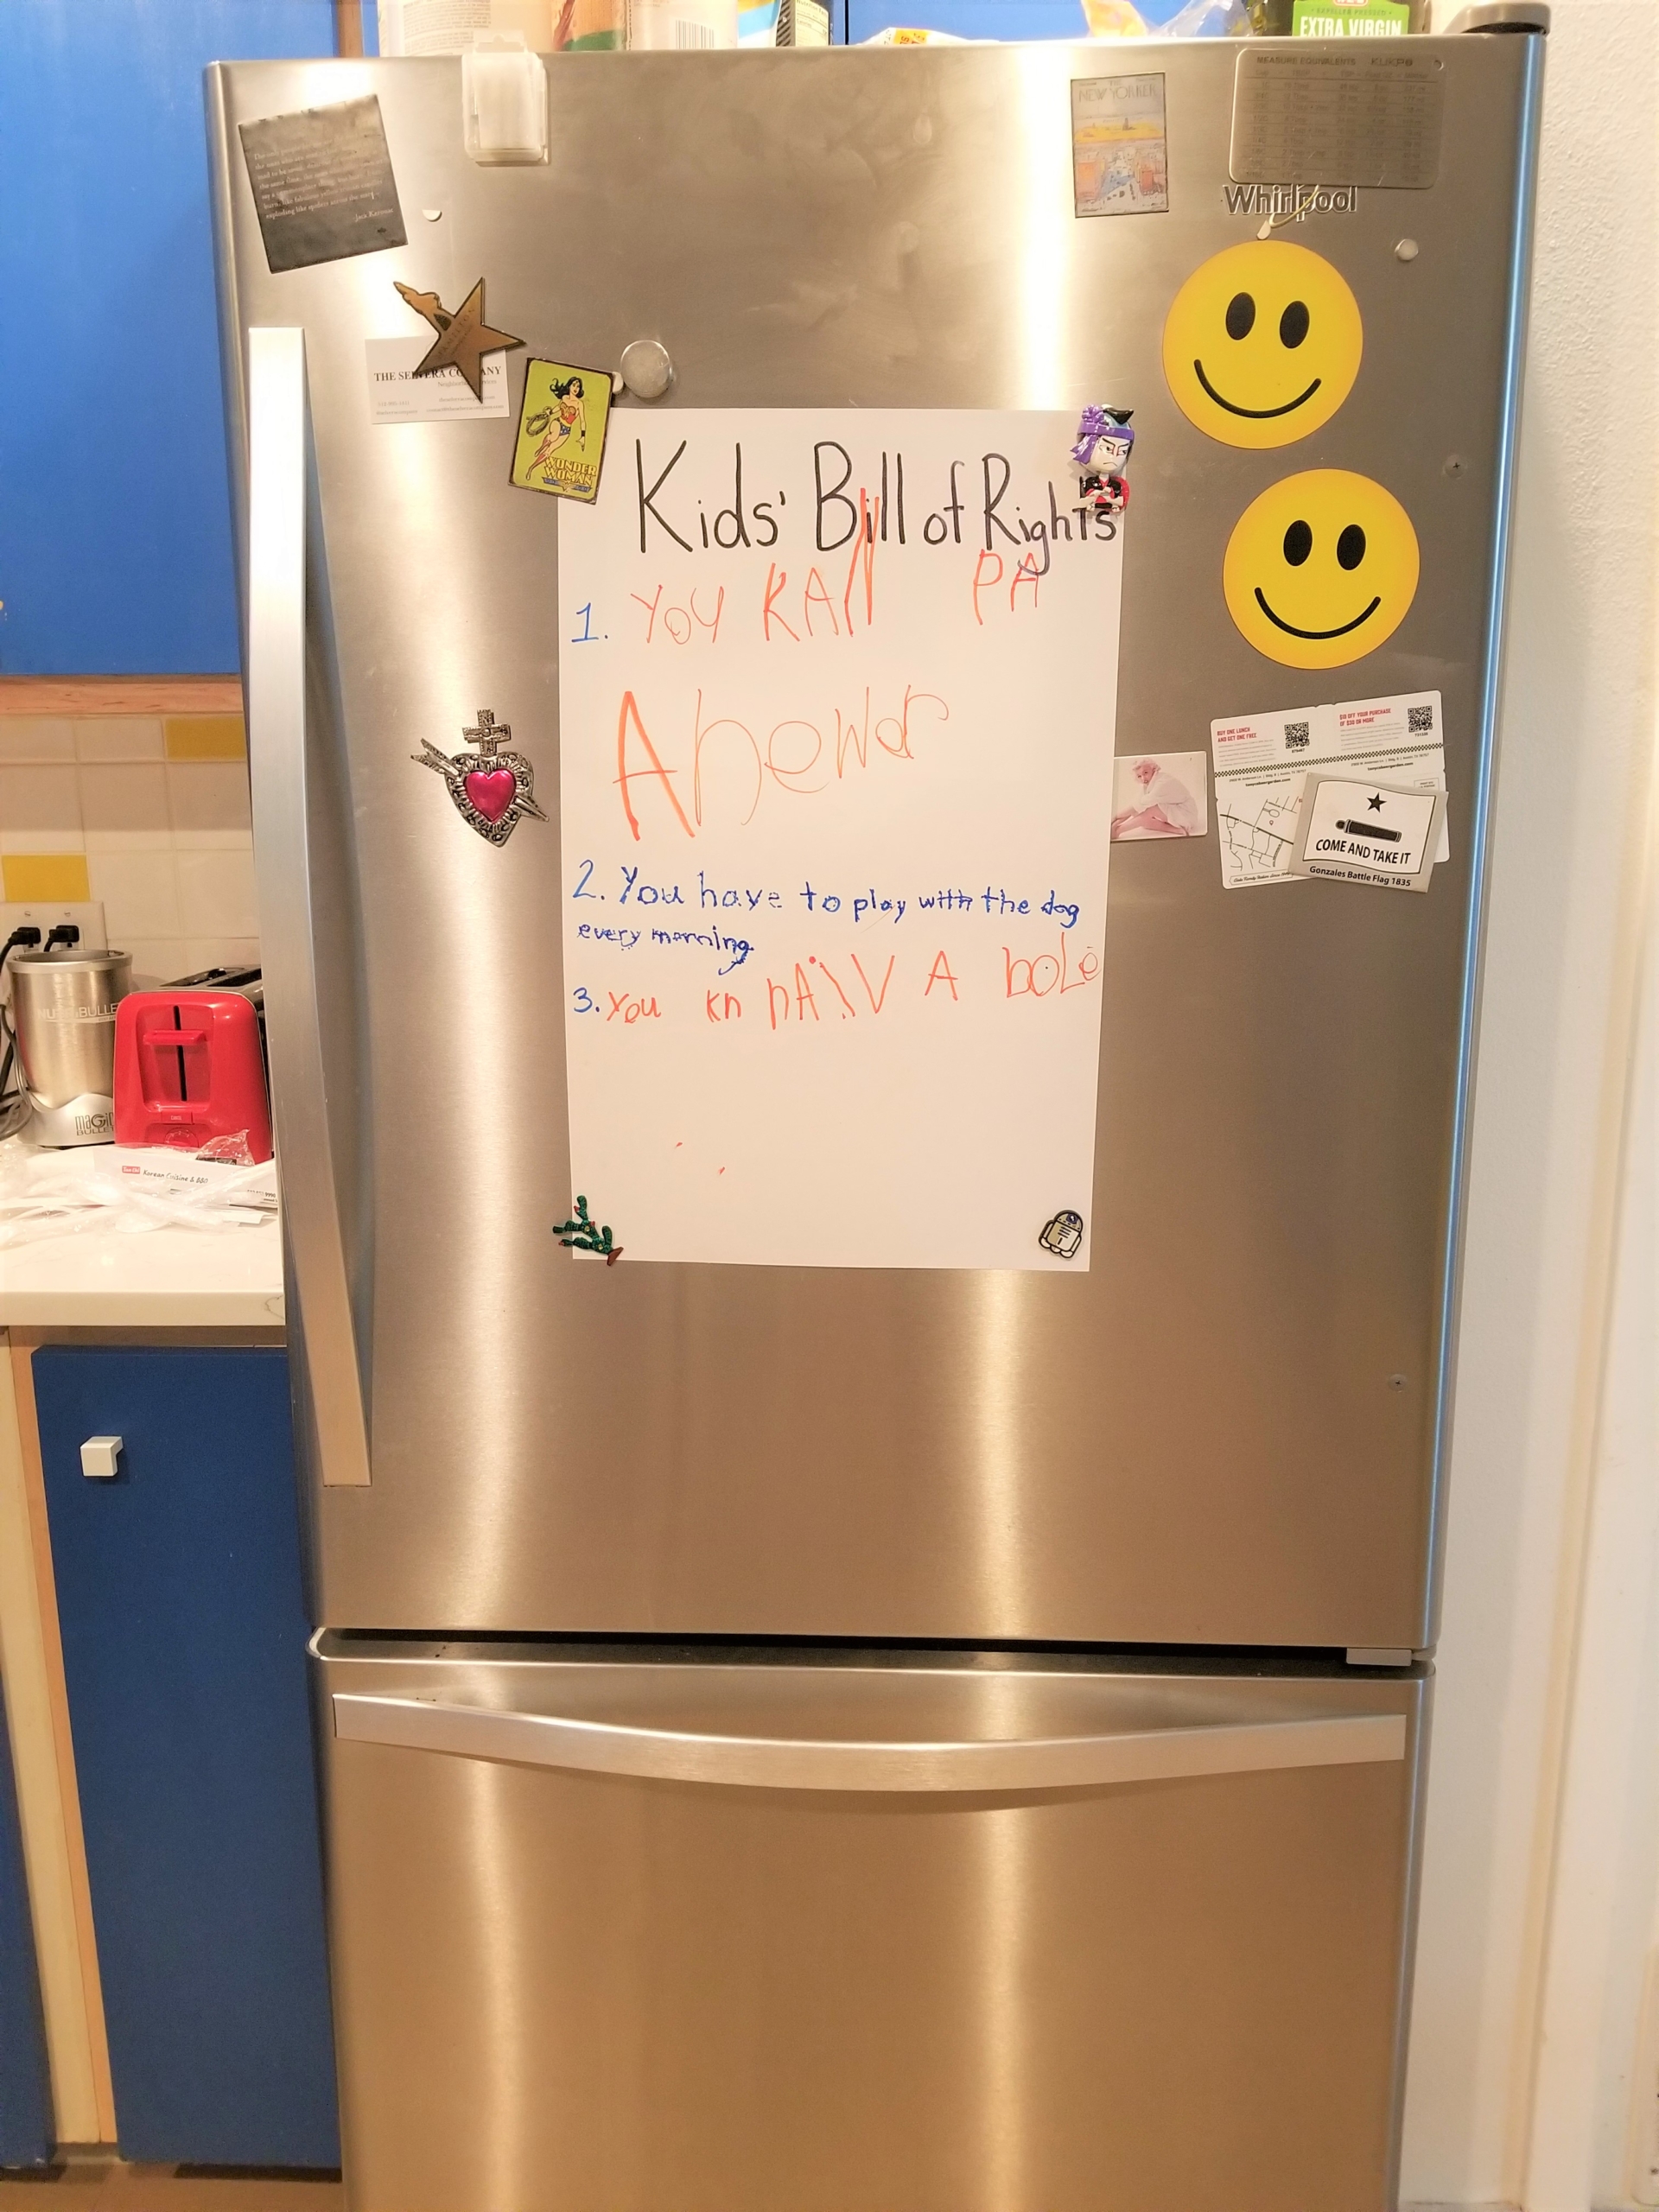 Fridge with Bill of Rights activity taped to it